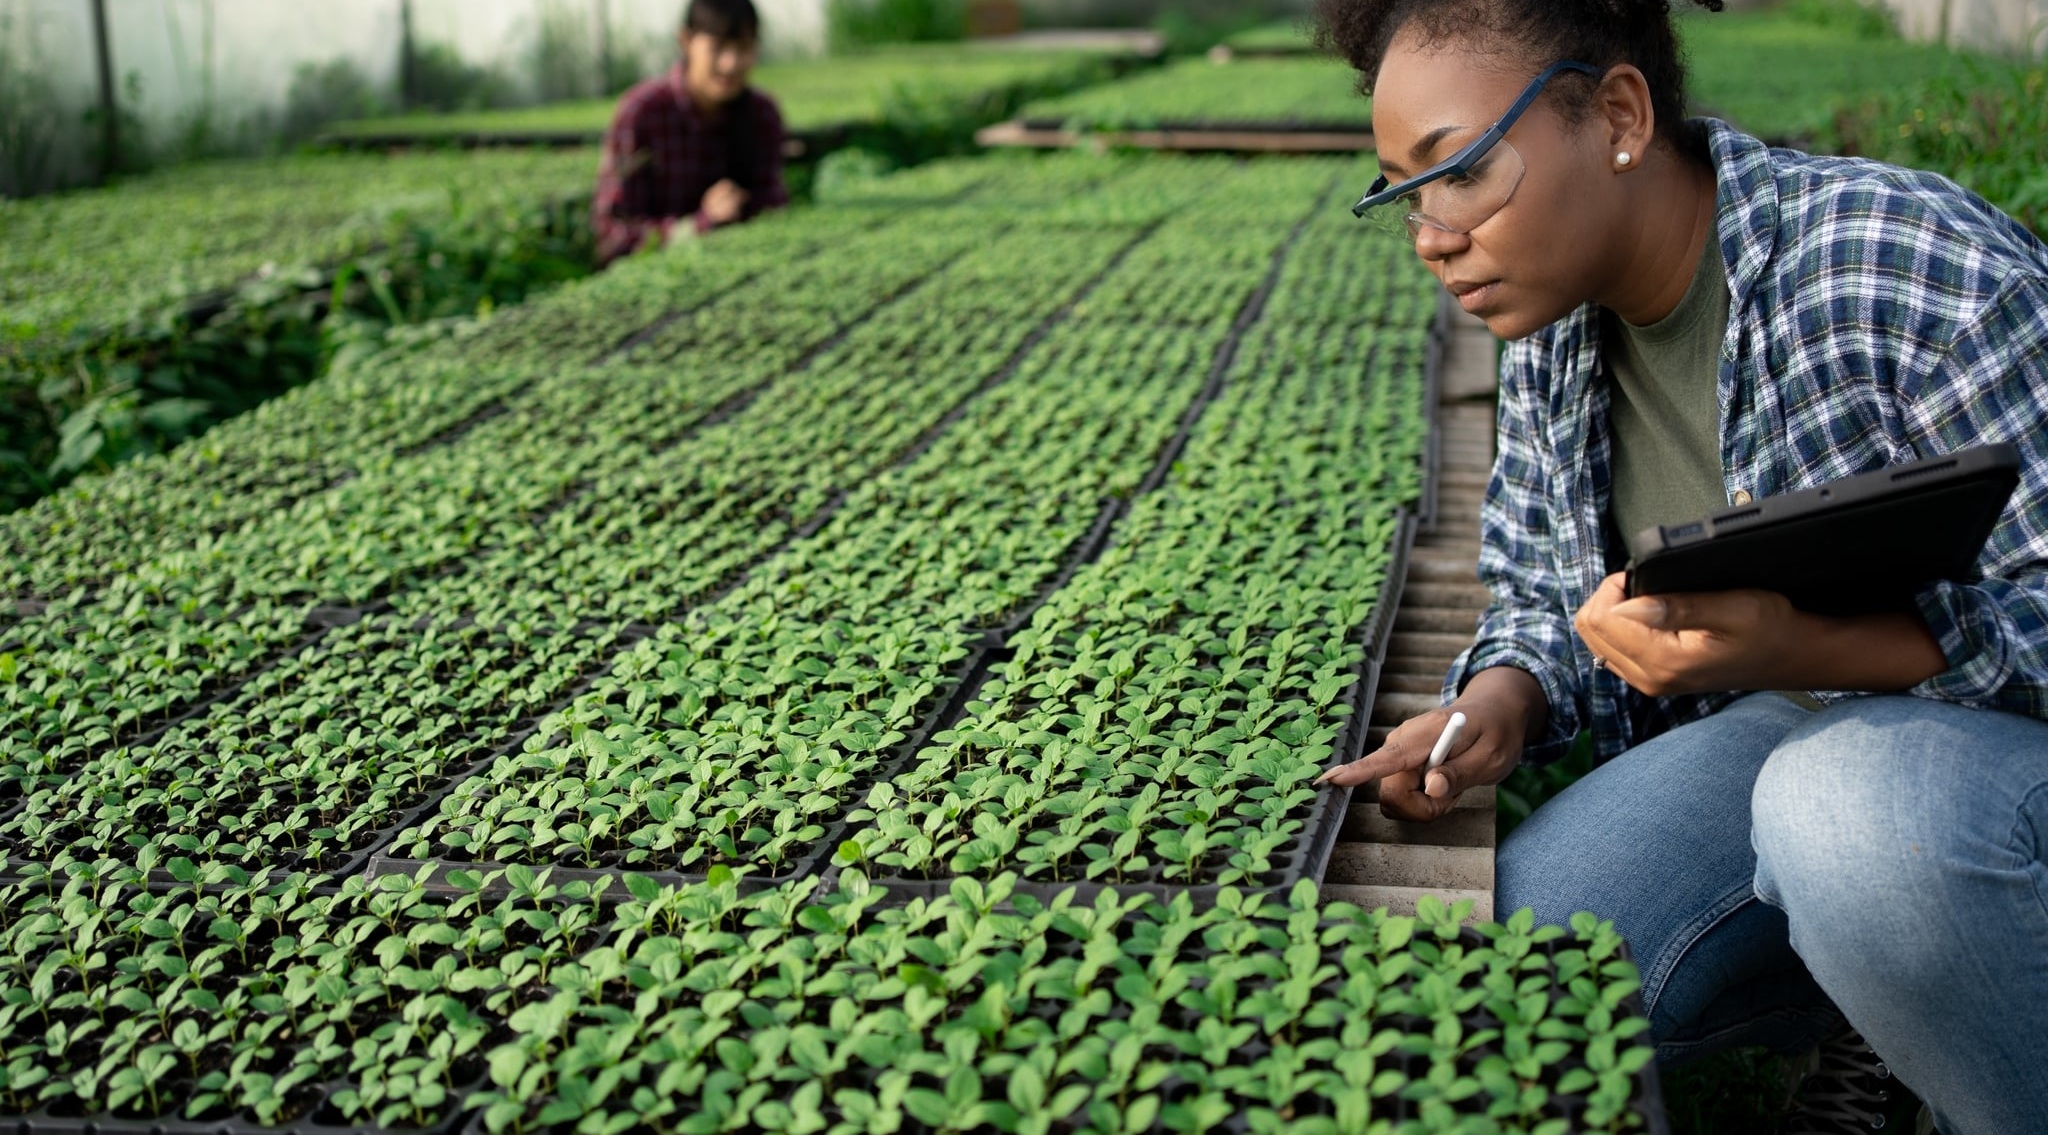 rows of seedlings in trays in a greenhouse with Black woman in kneeling down holding tablet observing them and additional person in background doing the same